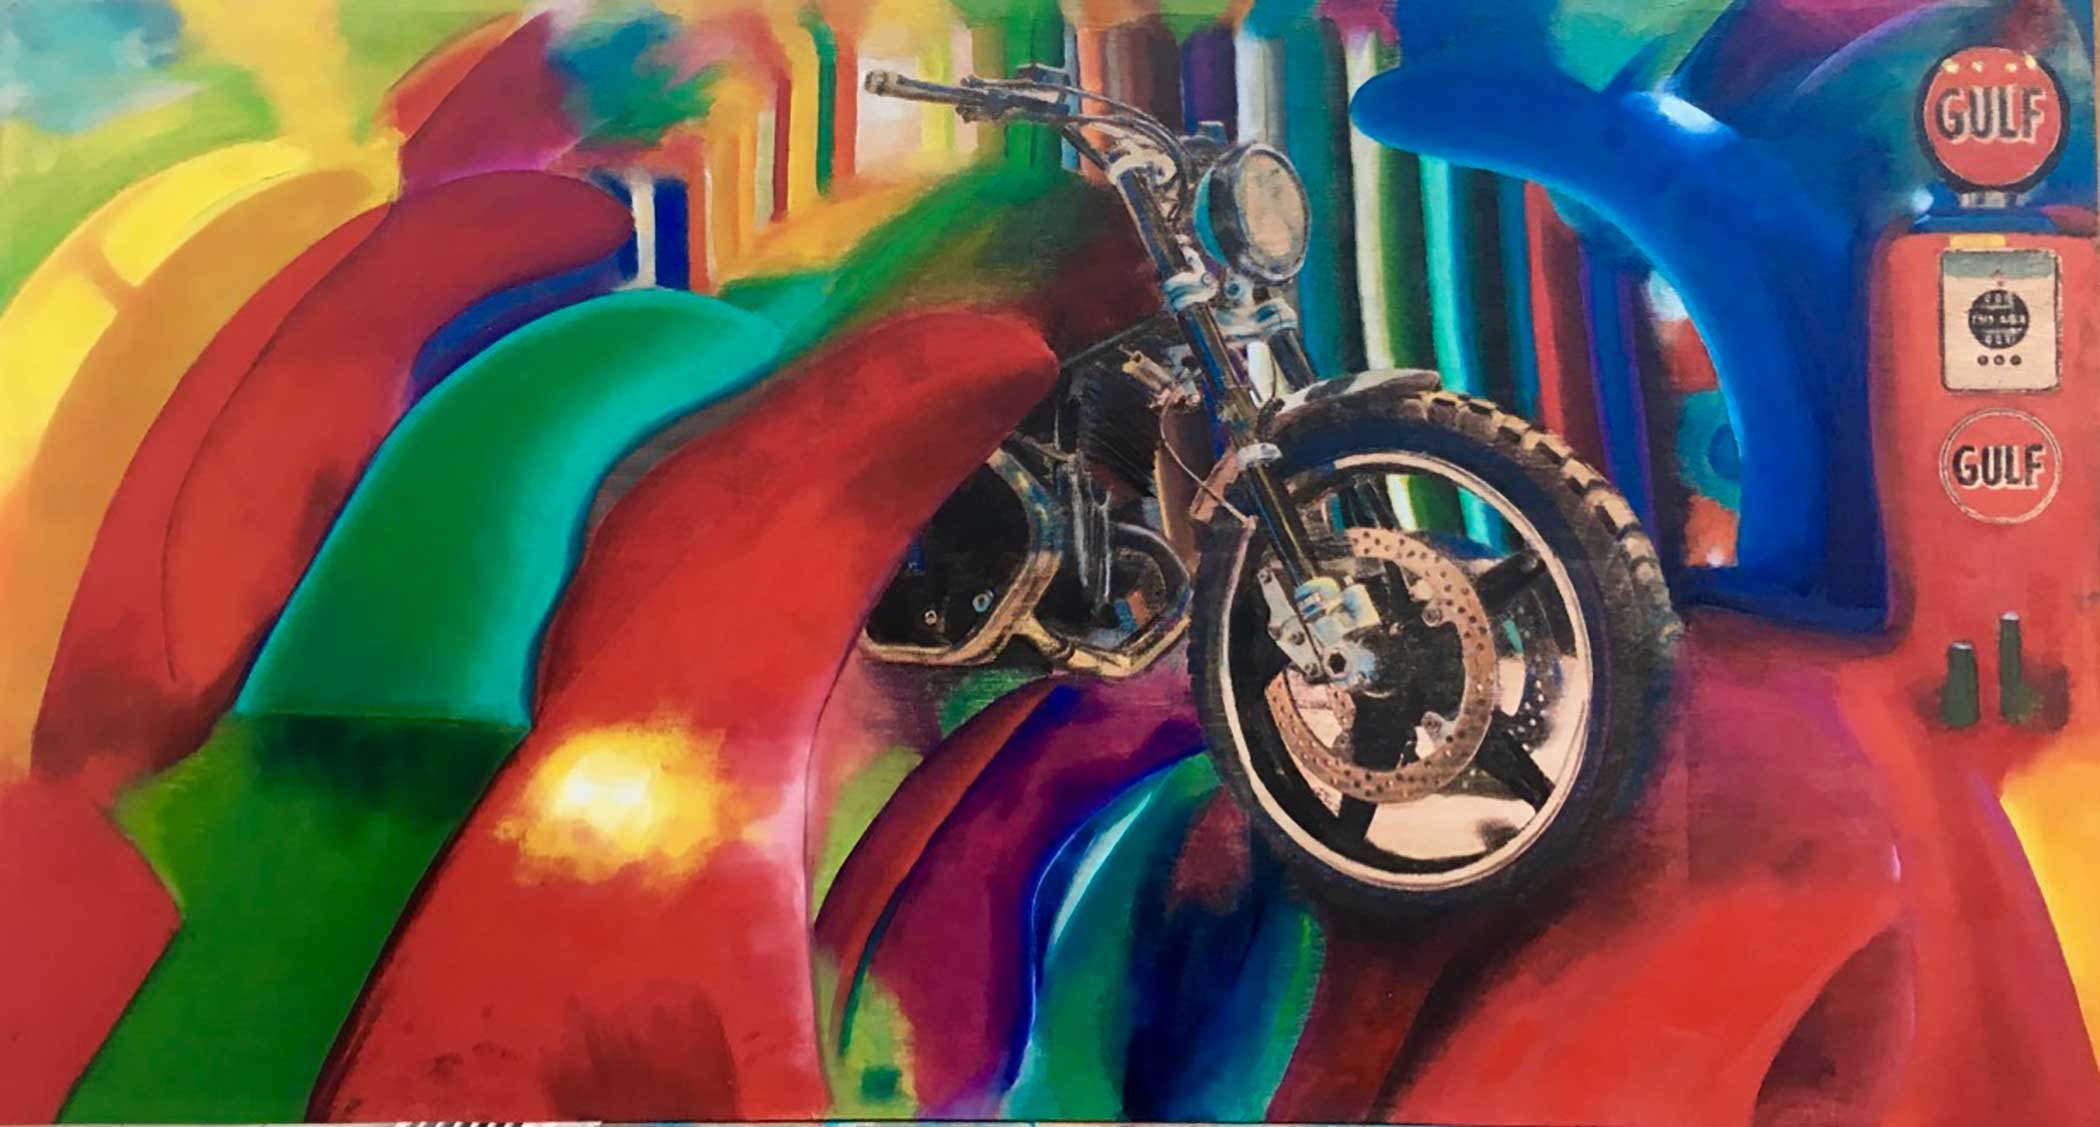 “Wheels and Fins” Mixed Media/ Oil on Wood 53cm x 98cm 2018